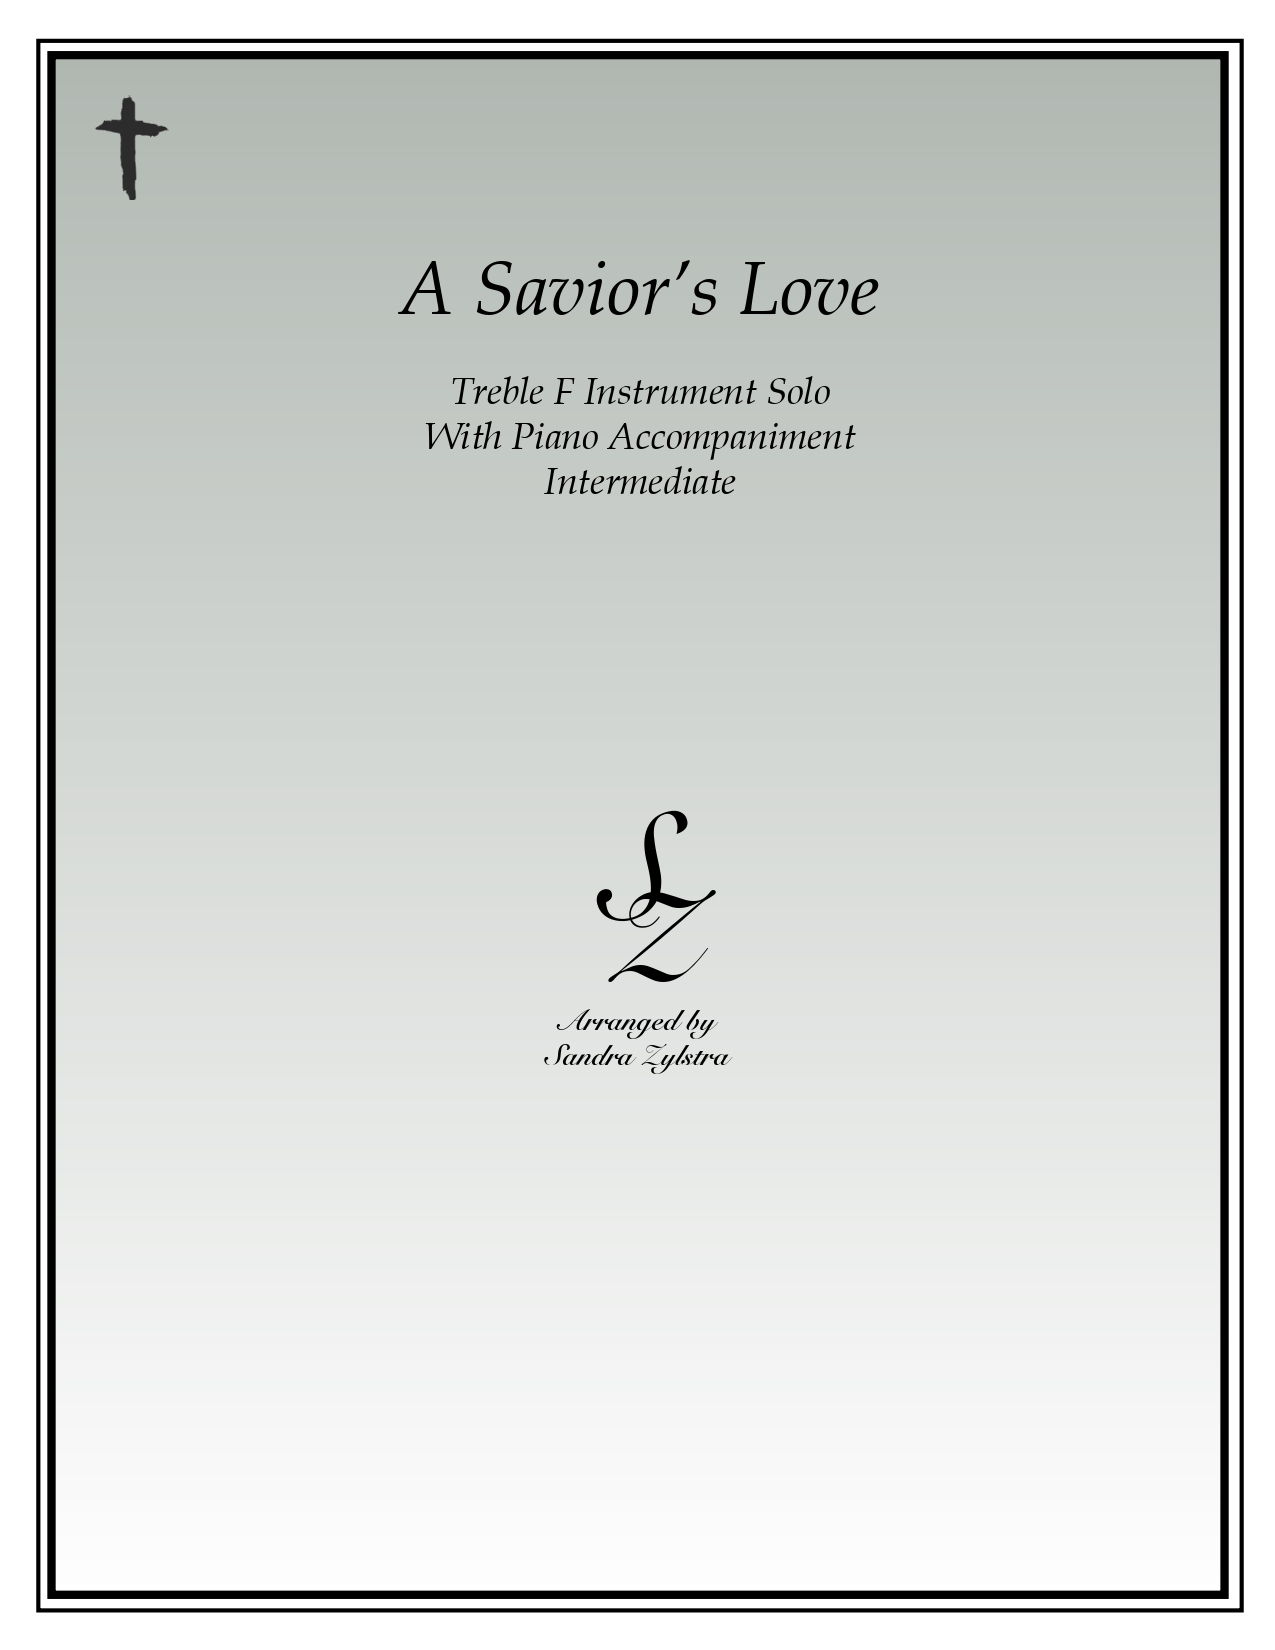 A Saviors Love F instrument solo part cover page 00011